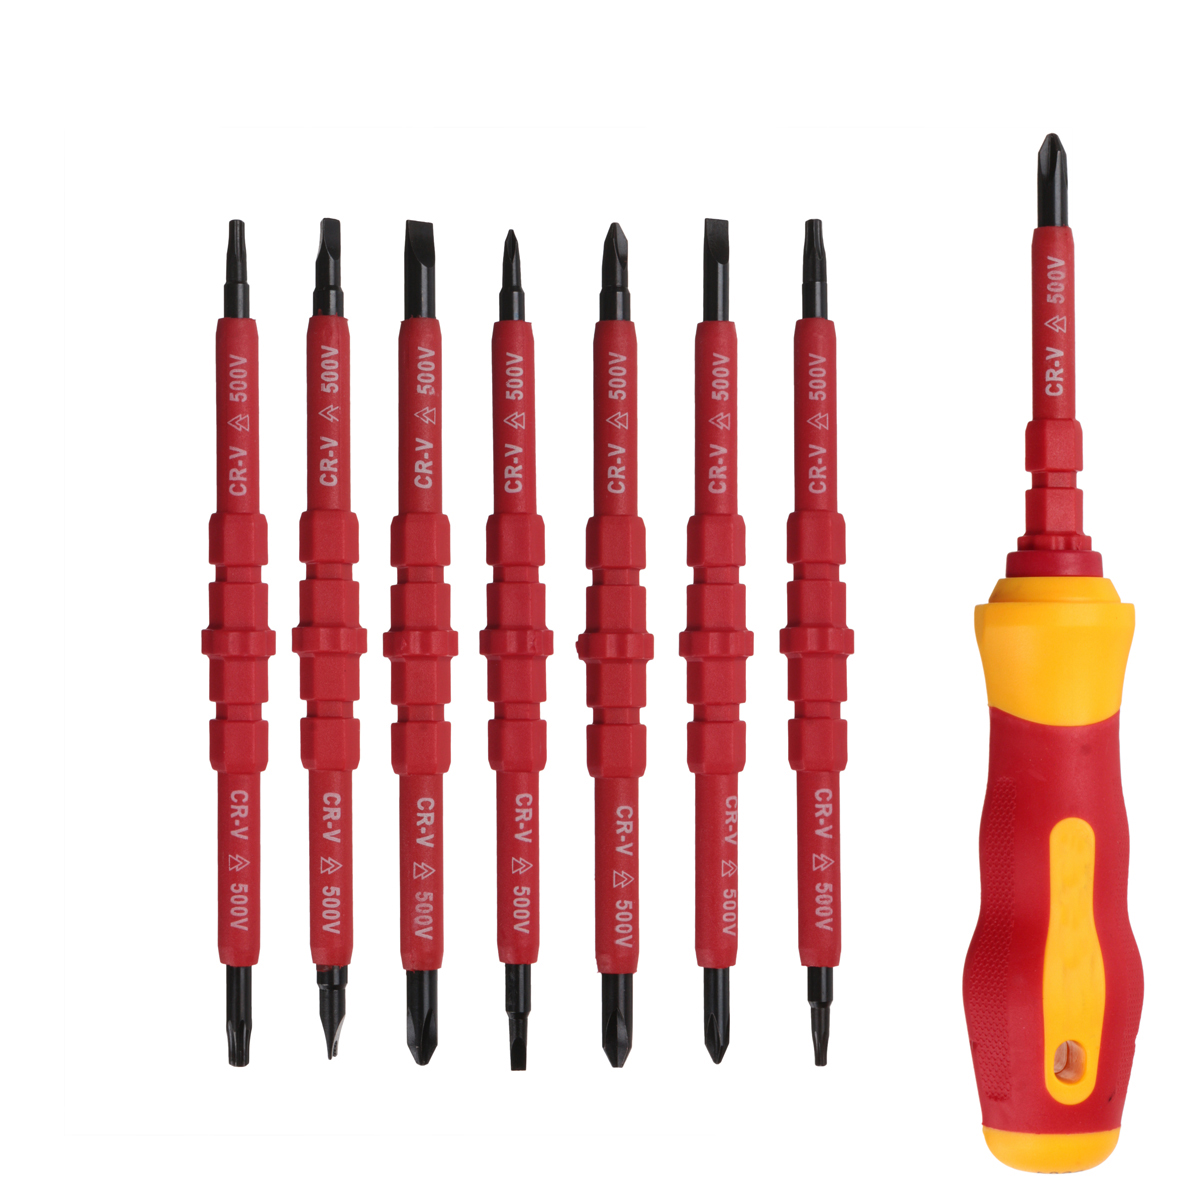 Raitooltrade-HT01-7pcs-Electronic-Insulated-Hand-Screwdriver-Tools-Accessory-Set-1045867-1